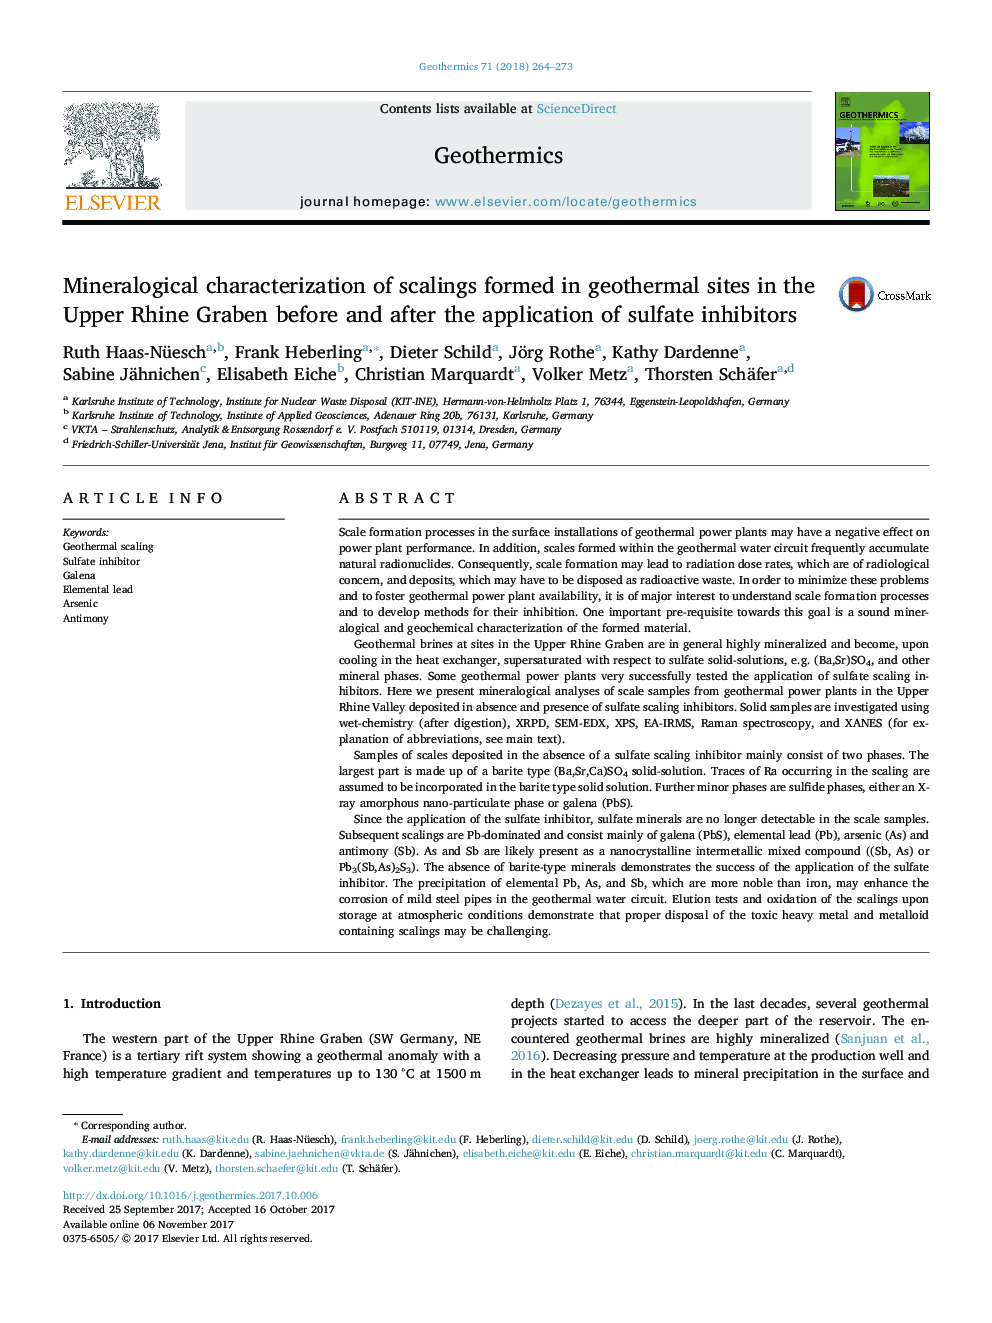 Mineralogical characterization of scalings formed in geothermal sites in the Upper Rhine Graben before and after the application of sulfate inhibitors